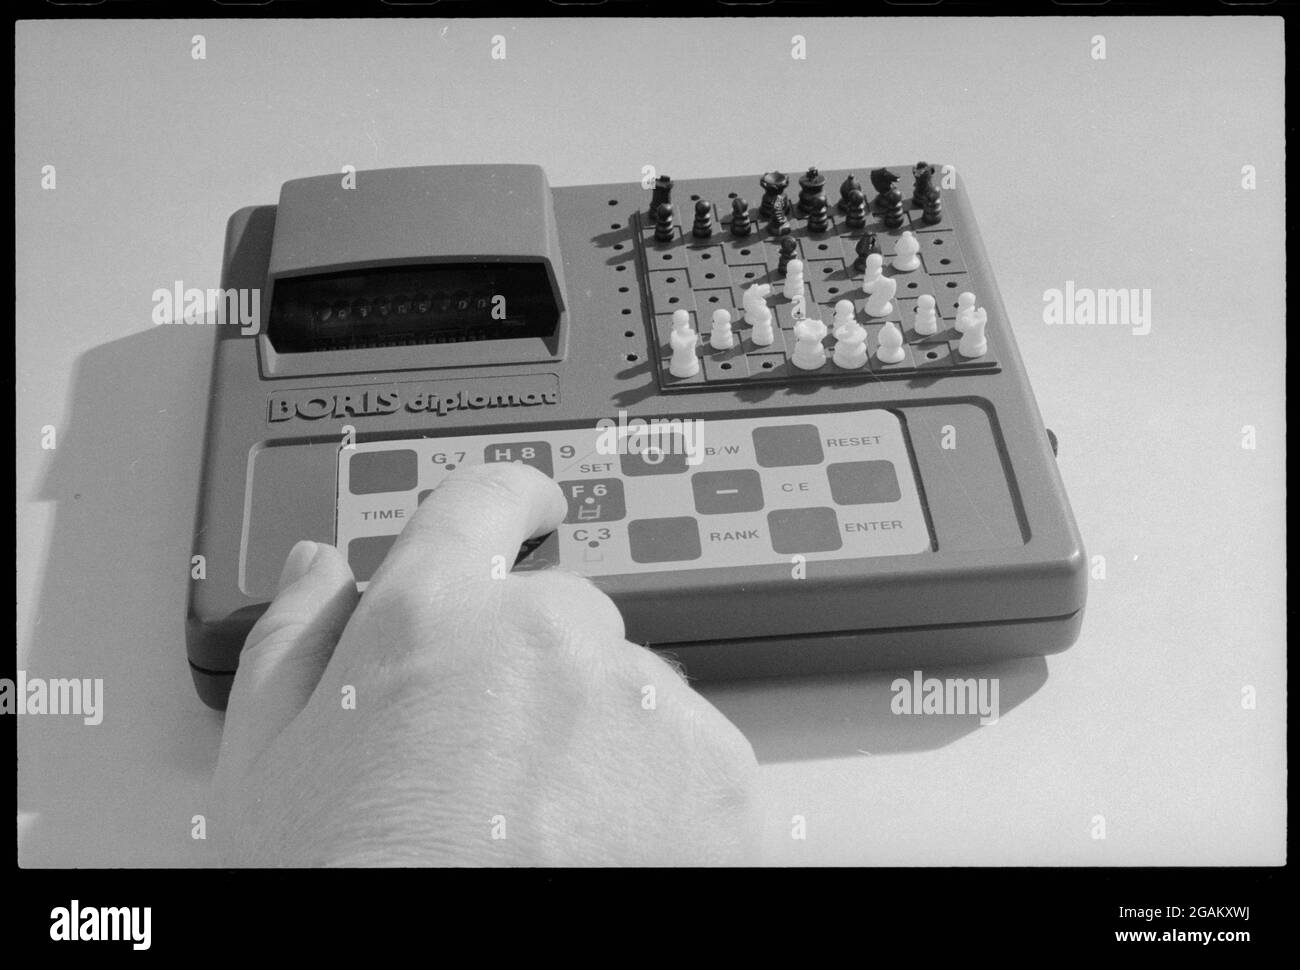 Closeup of hand on a 'Boris Diplomat' electronic travel computer chess game designed and manufactured by Applied Concepts, no location, 2/14/1979. (Photo by Marion S Trikosko/US News & World Report Collection/RBM Vintage Images) Stock Photo